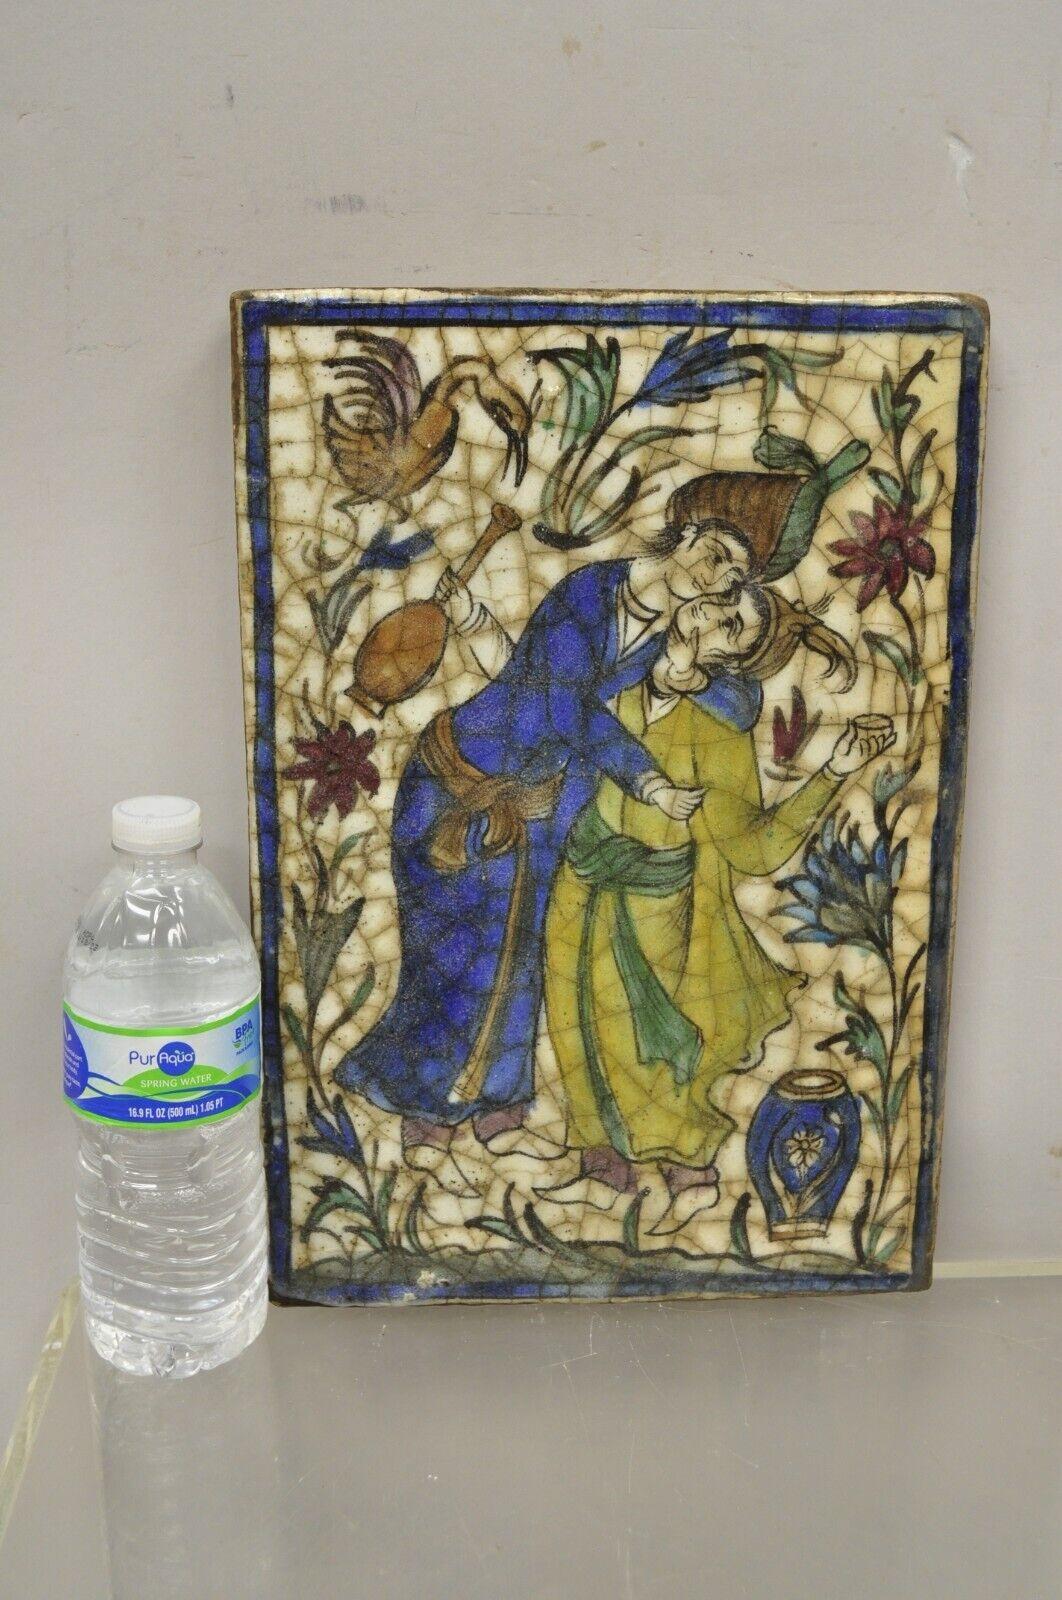 Antique Persian Iznik Qajar Style Ceramic Pottery Tile Man and Woman Embrace C1. Original crackle glazed finish, heavy ceramic pottery construction, very impressive detail, wonderful style and form. Great to mount as wall art or accent tiles for